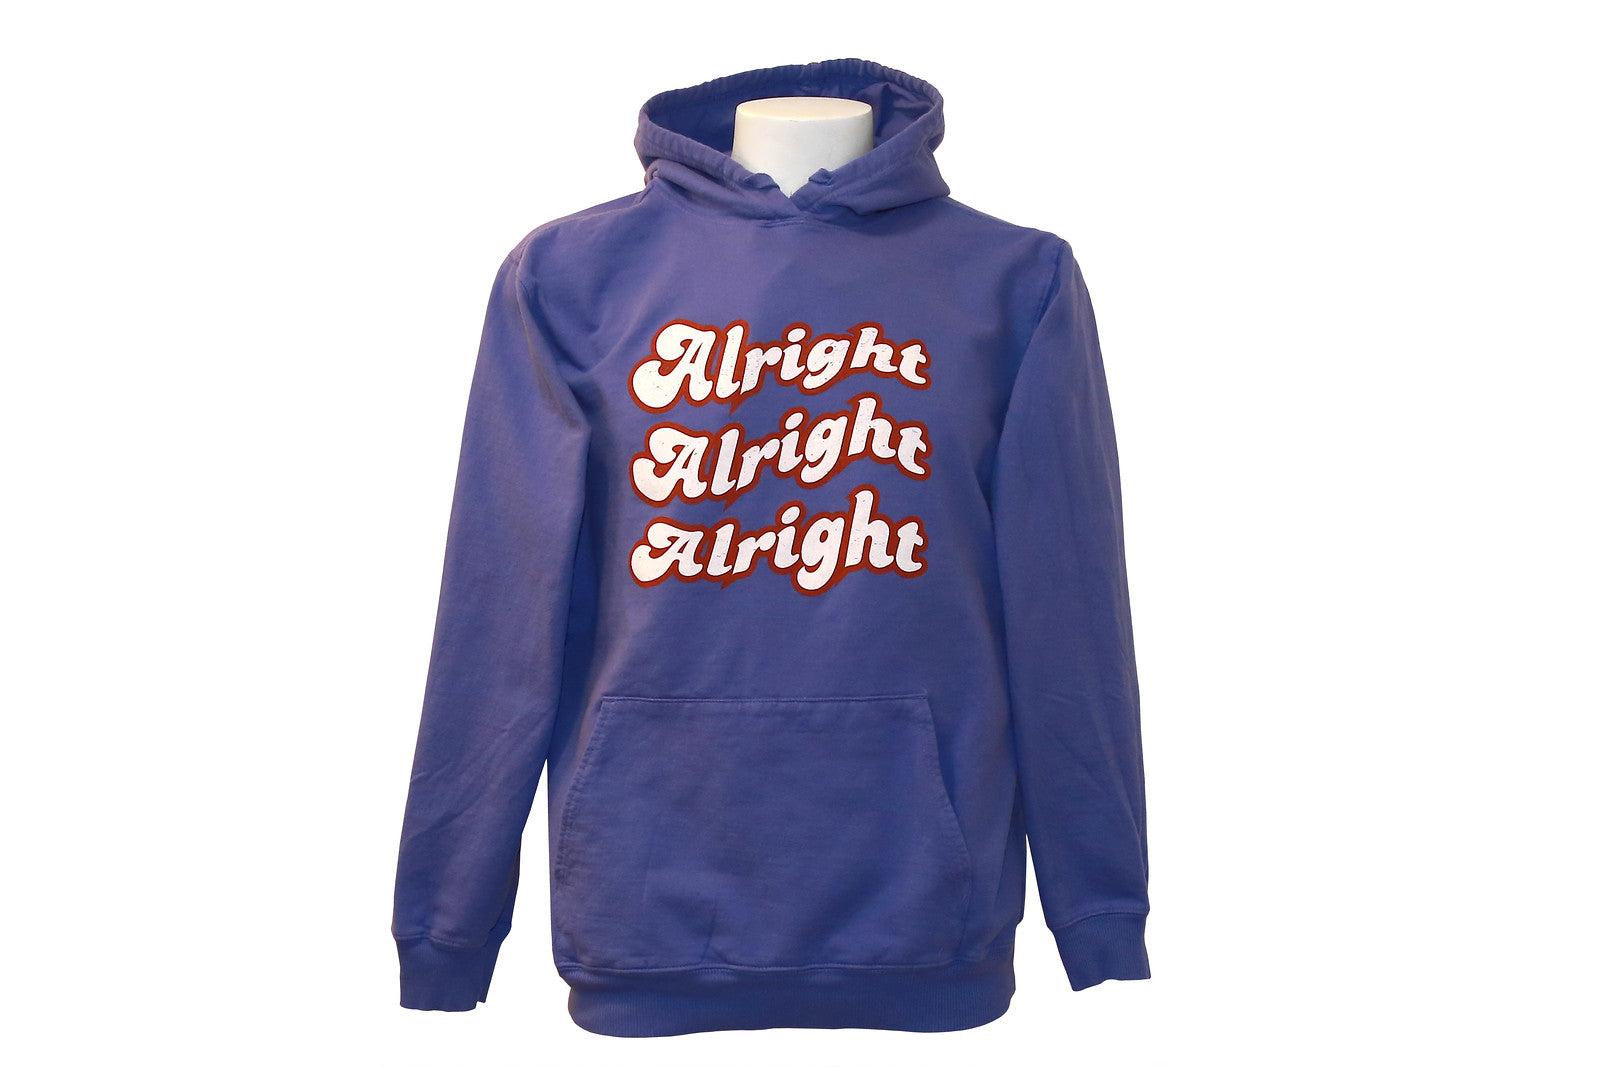 ALRIGHTY THEN Pullover Hoodie - SPRING CLEANING SPECIAL